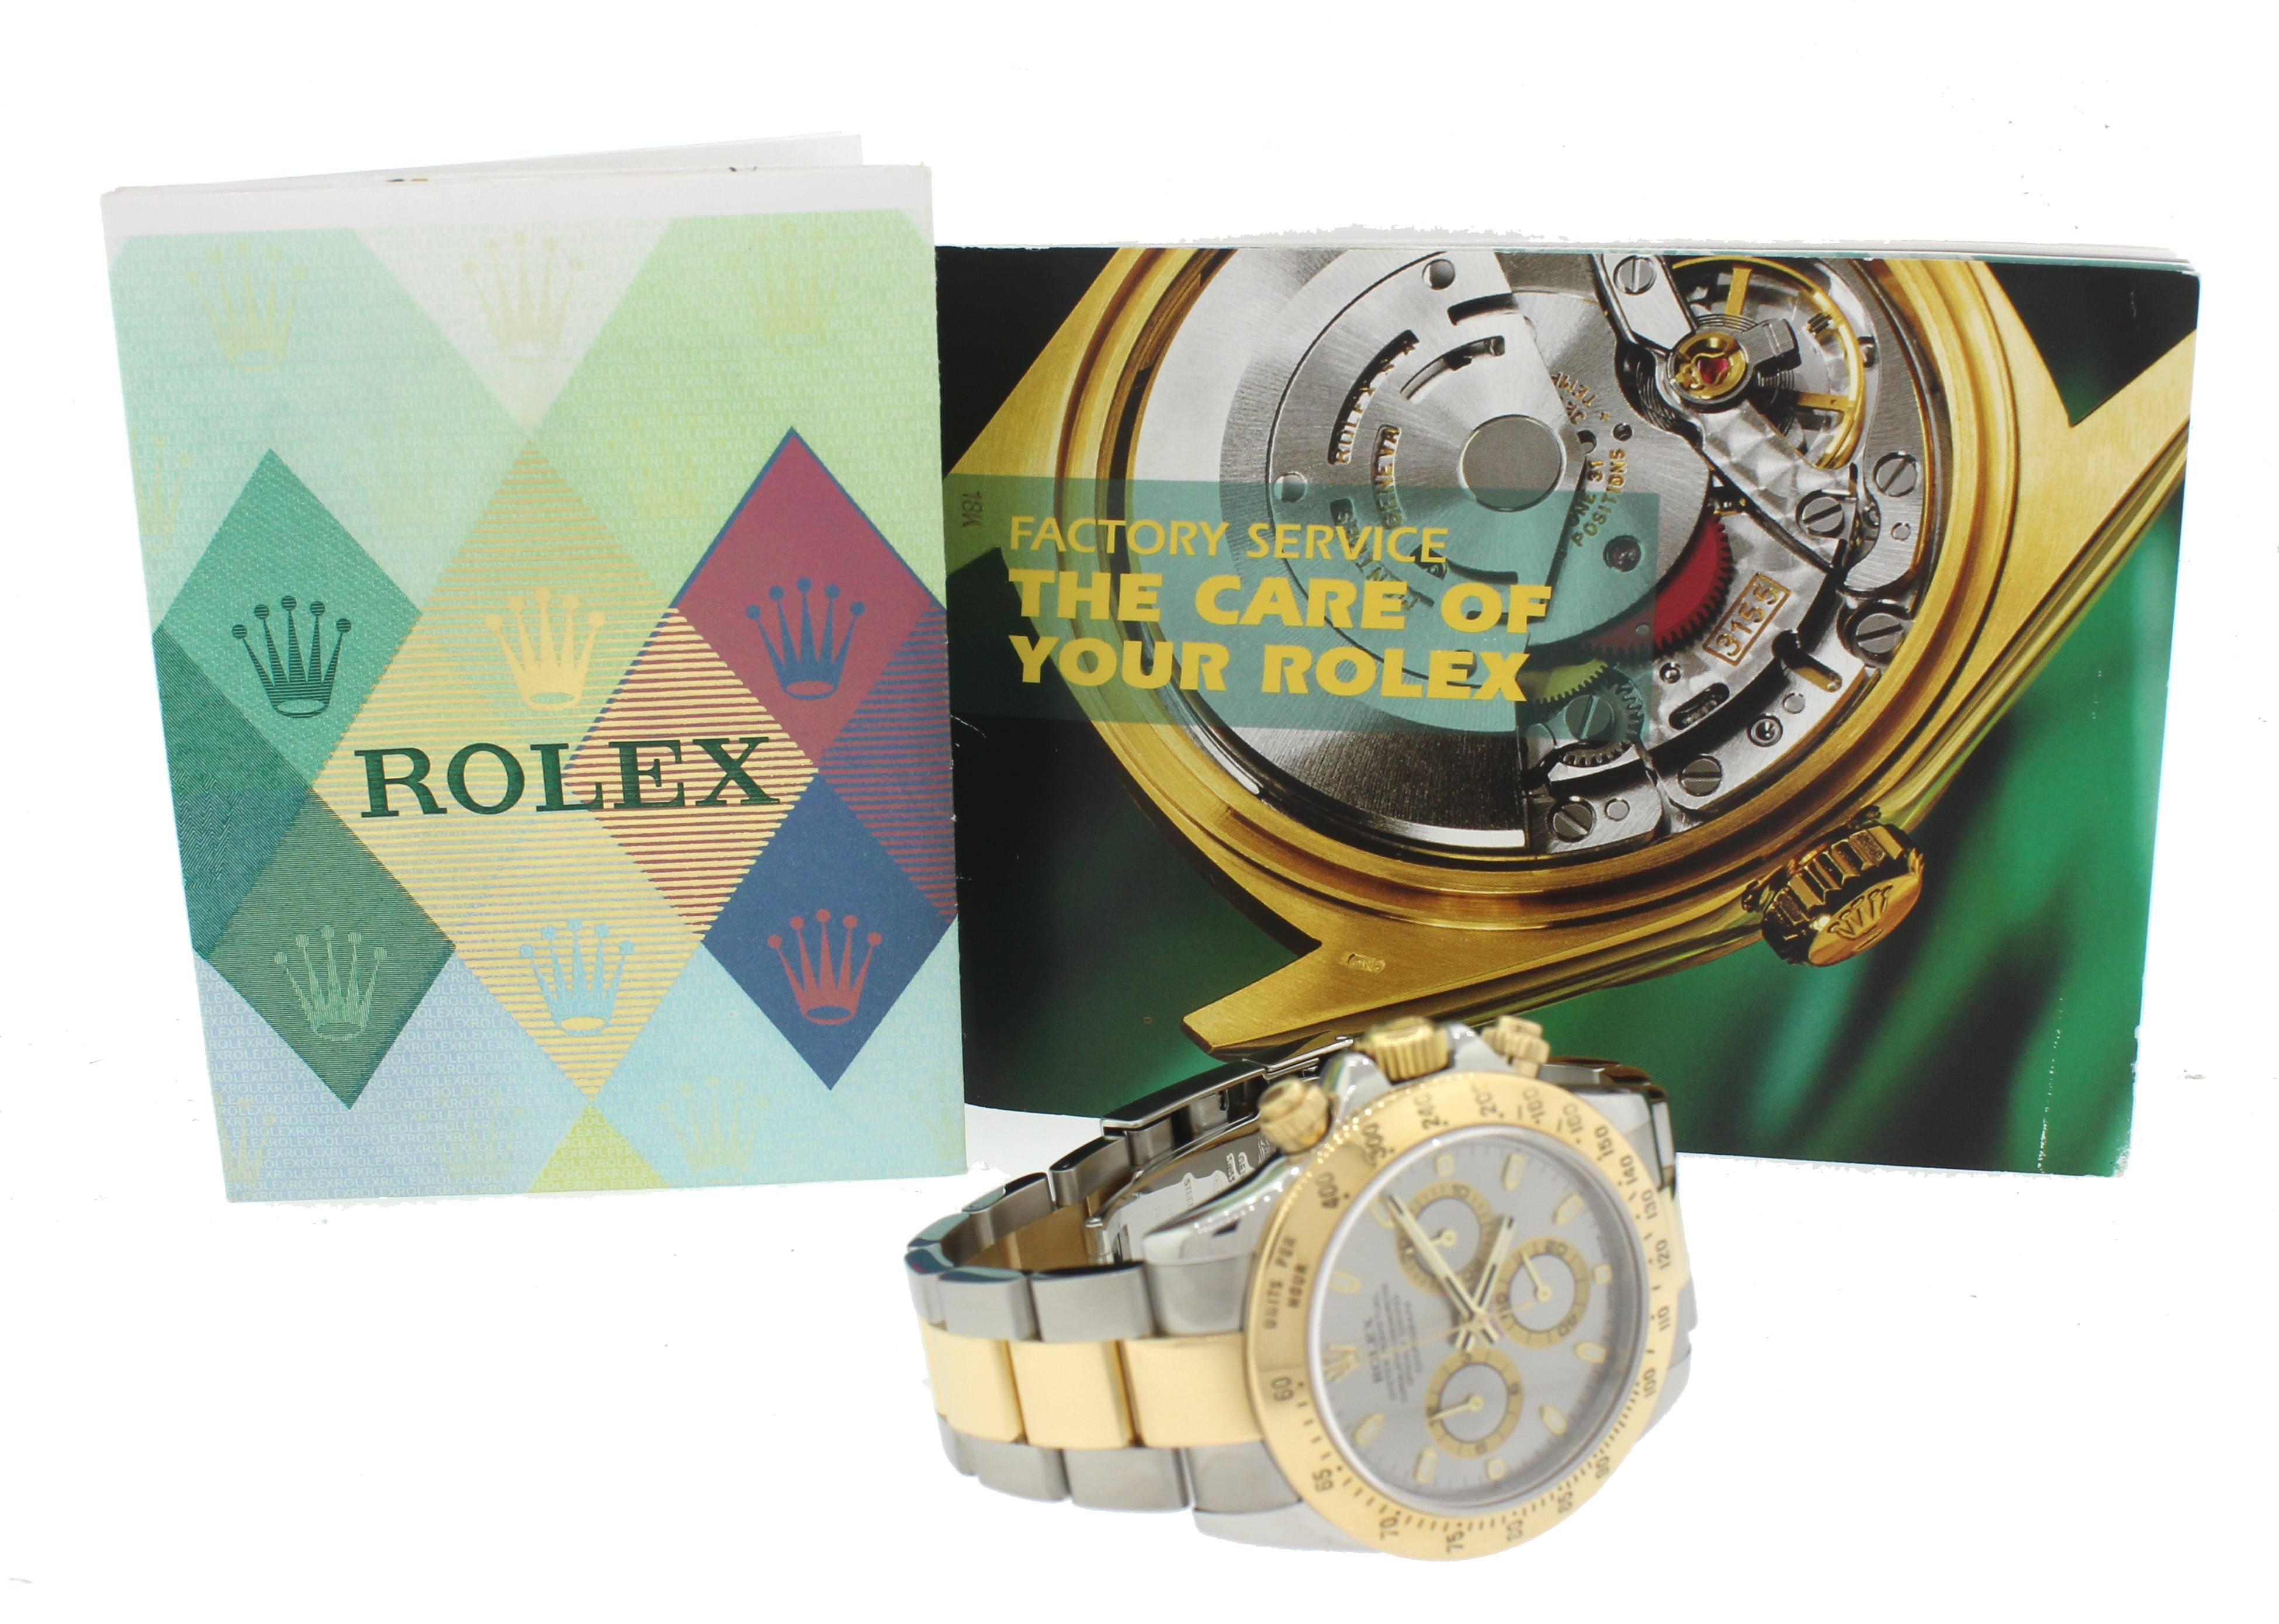 2006 Rolex Daytona Cosmograph 116523 Silver Steel Gold Two Tone Watch. Comes with Original Rolex Papers, Box and Booklets.

Brand      	Rolex (Guaranteed Authentic)
Model 	Daytona Cosmograph
Reference Number	116523

Serial Number